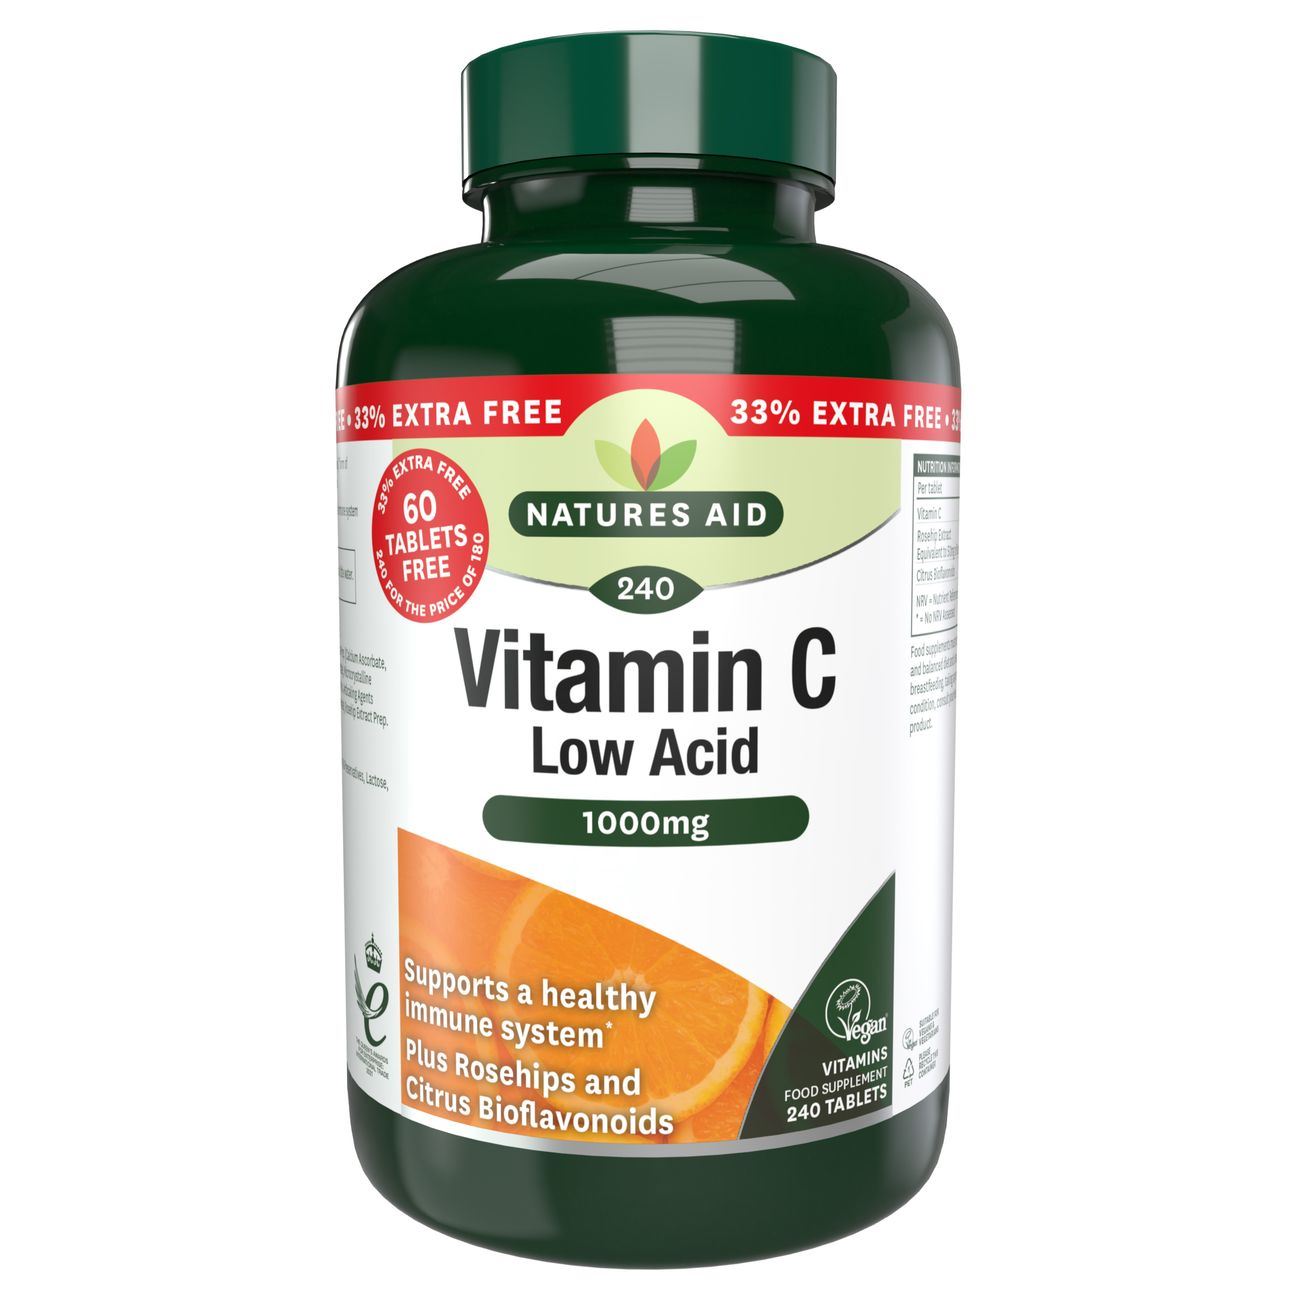 Natures Aid Vitamin C 1000mg 240 Tablets with Rosehips and Citrus Bioflavonoids